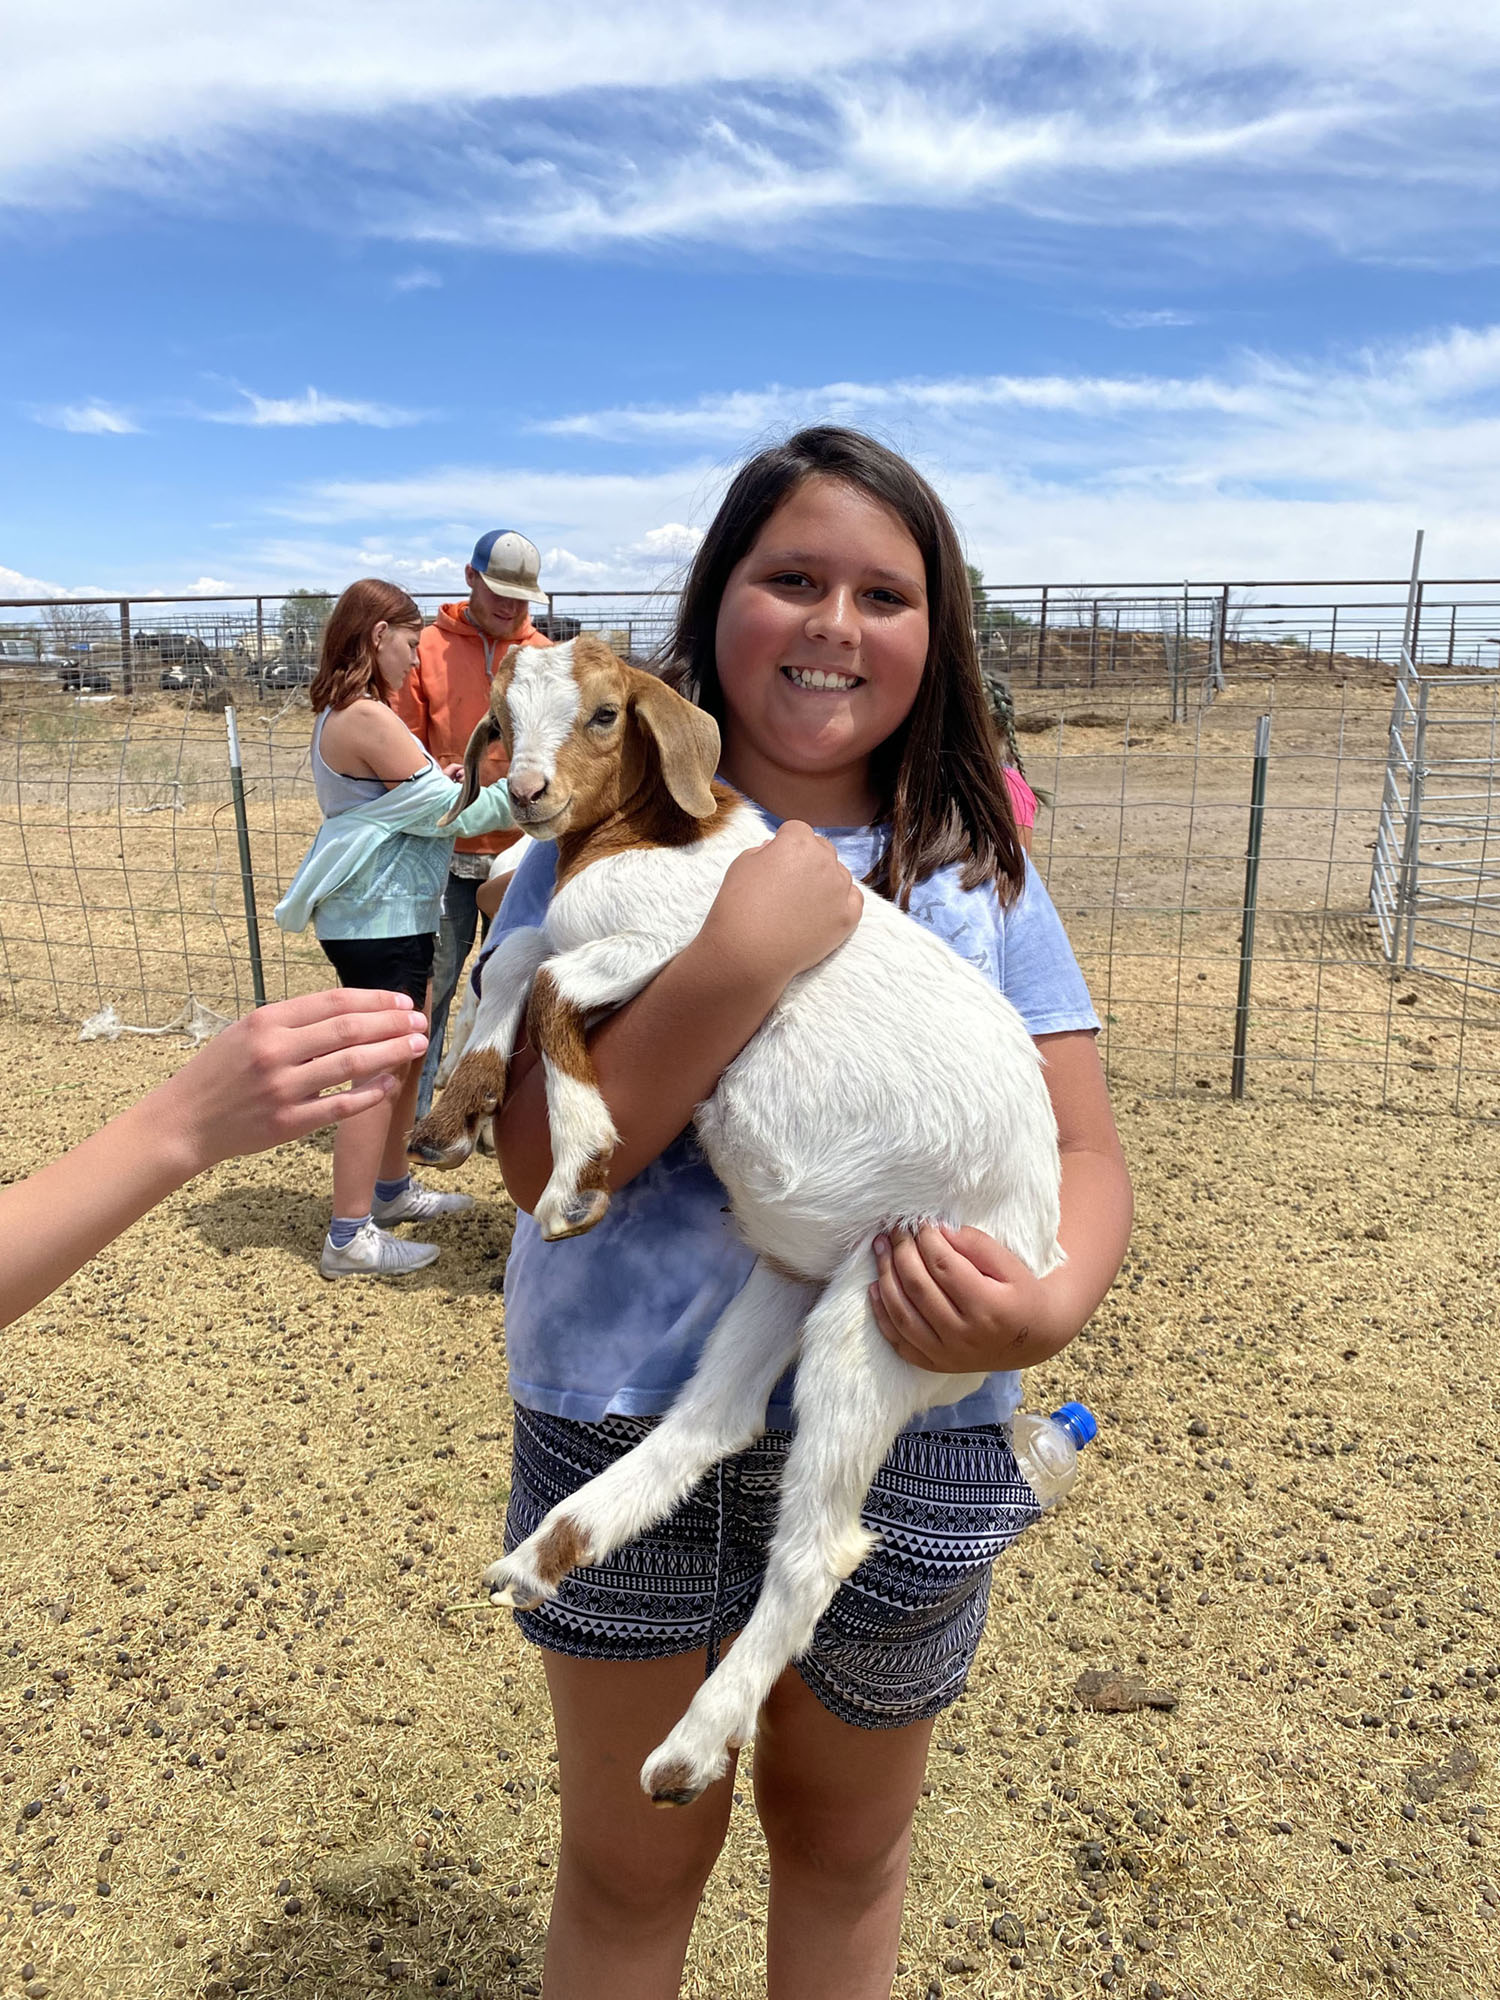 Girl holding goat in summer activity in Rupert, ID.